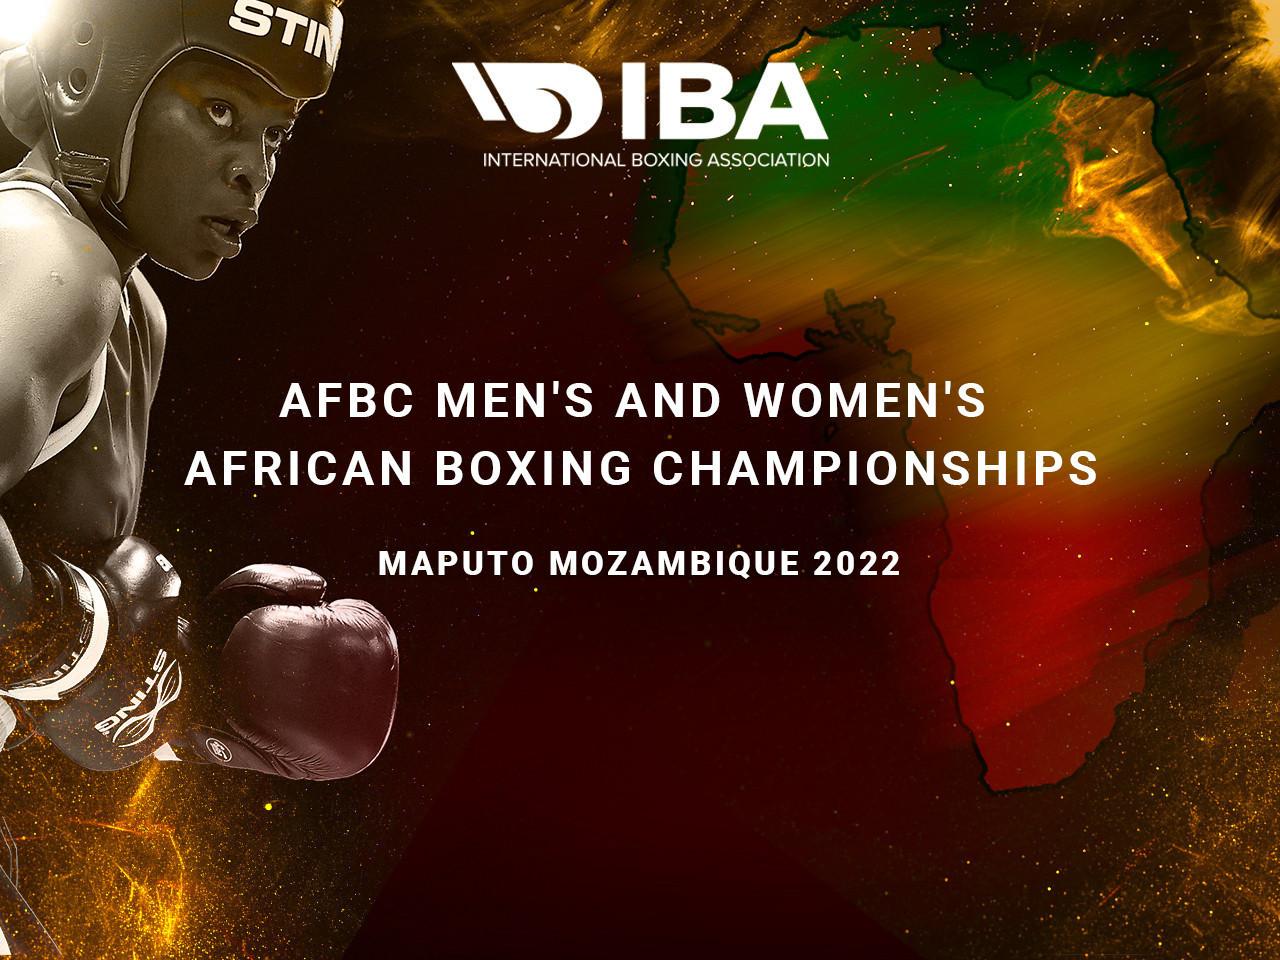 Mozambique achieved five gold medals at the AFBC Men's and Women's African Boxing Championships ©IBA